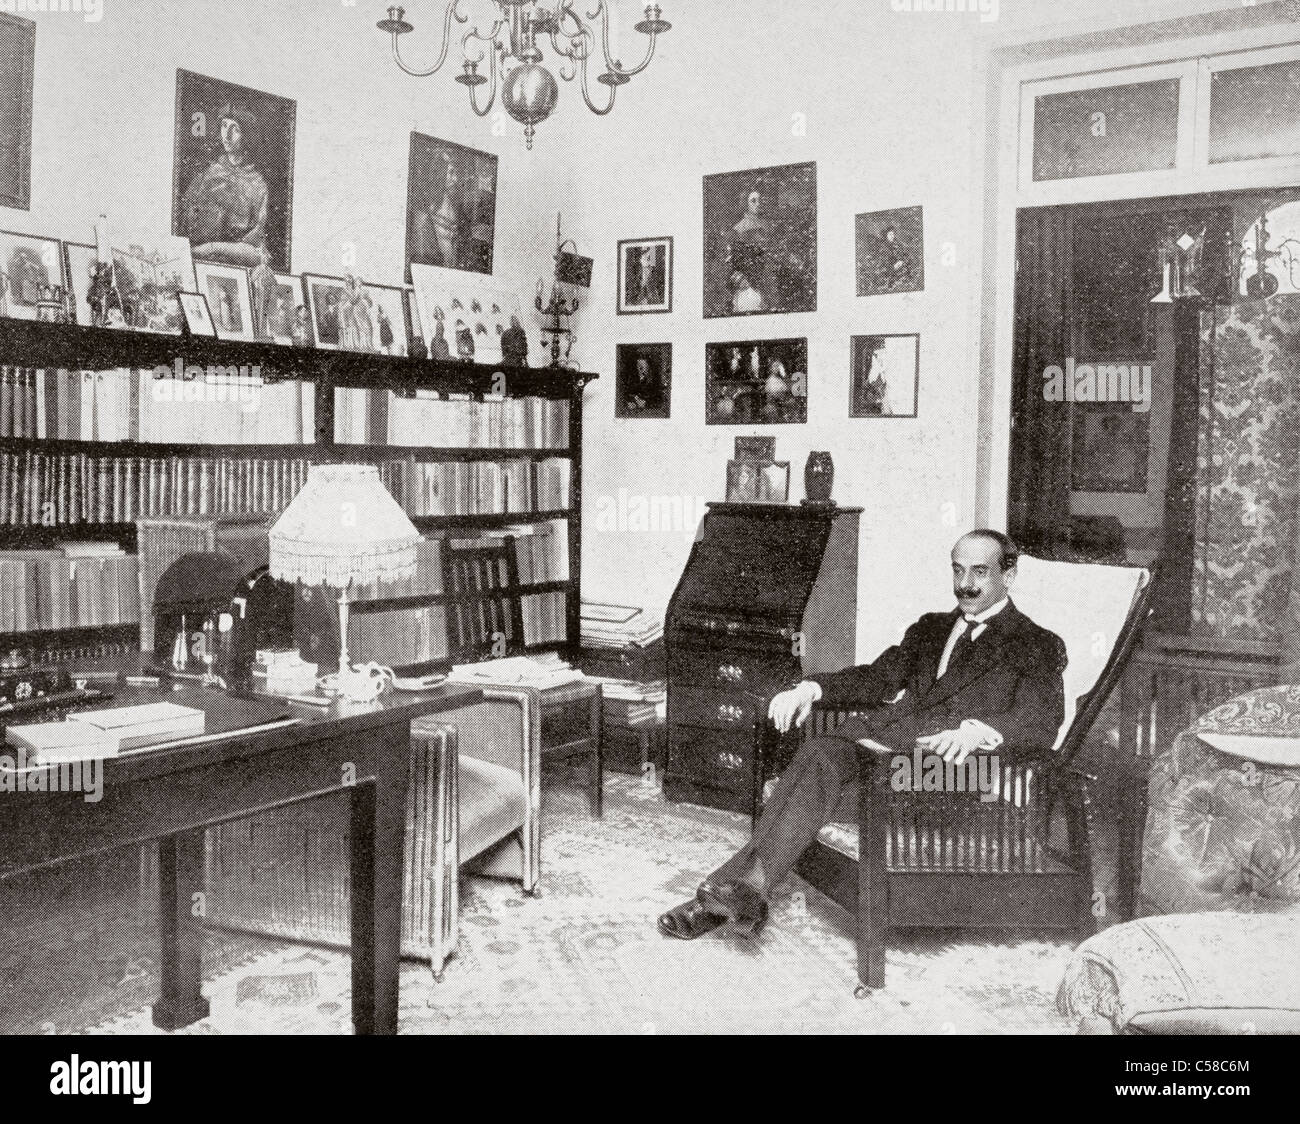 Gregorio Martínez Sierra, 1881 - 1947. Spanish writer, dramatist and theatre director, here seen in his study. Stock Photo